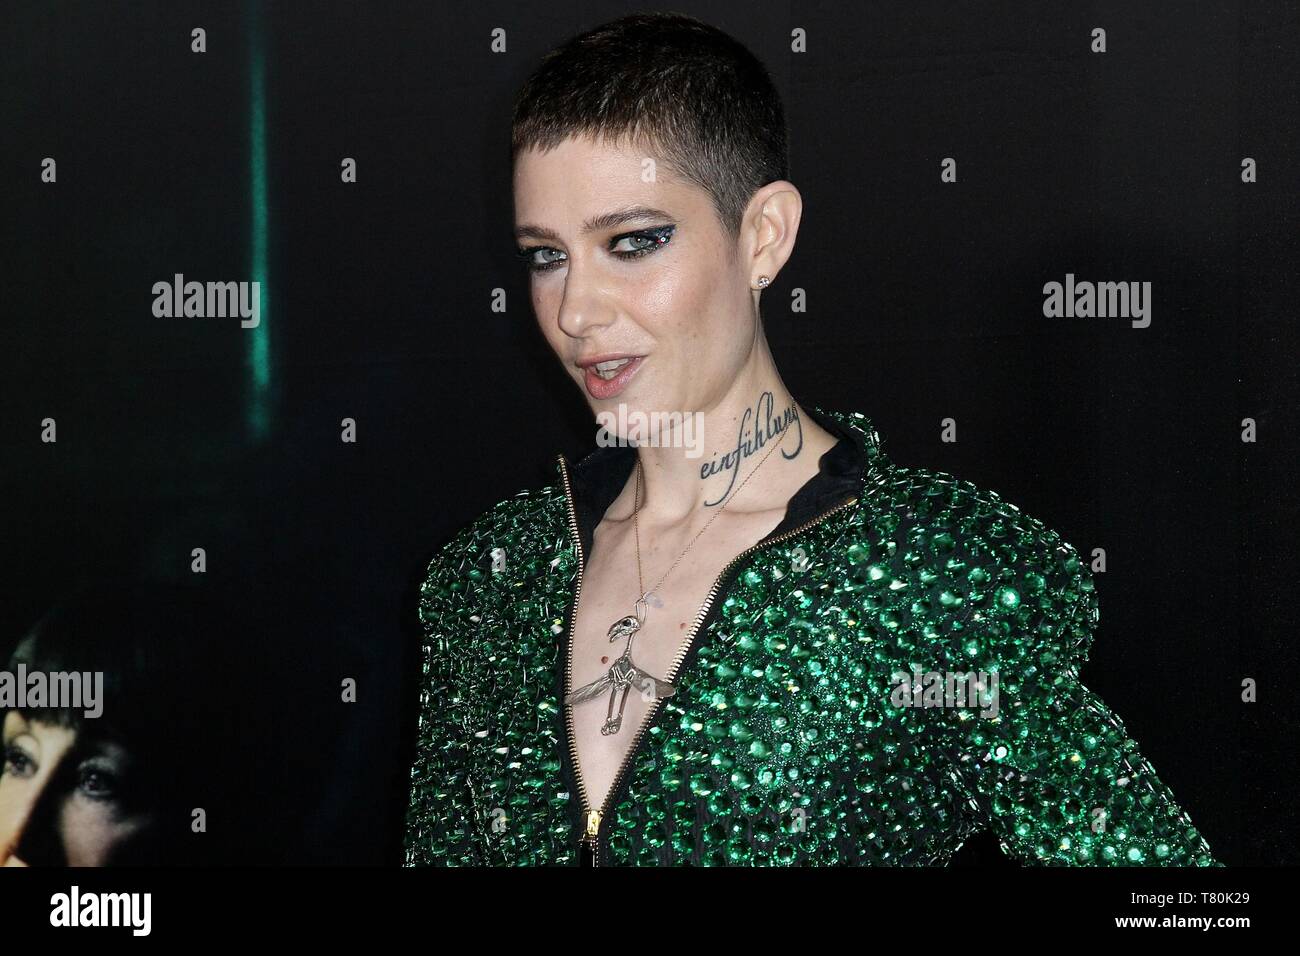 Brooklyn, NY, USA. 9th May, 2019. Asia Kate Dillon at arrivals for JOHN WICK: CHAPTER 3 - PARABELLUM World Premiere, One Hanson Place - formerly Williamsburgh Savings Bank, Brooklyn, NY May 9, 2019. Photo By: Steve Mack/Everett Collection/Alamy Live News Stock Photo